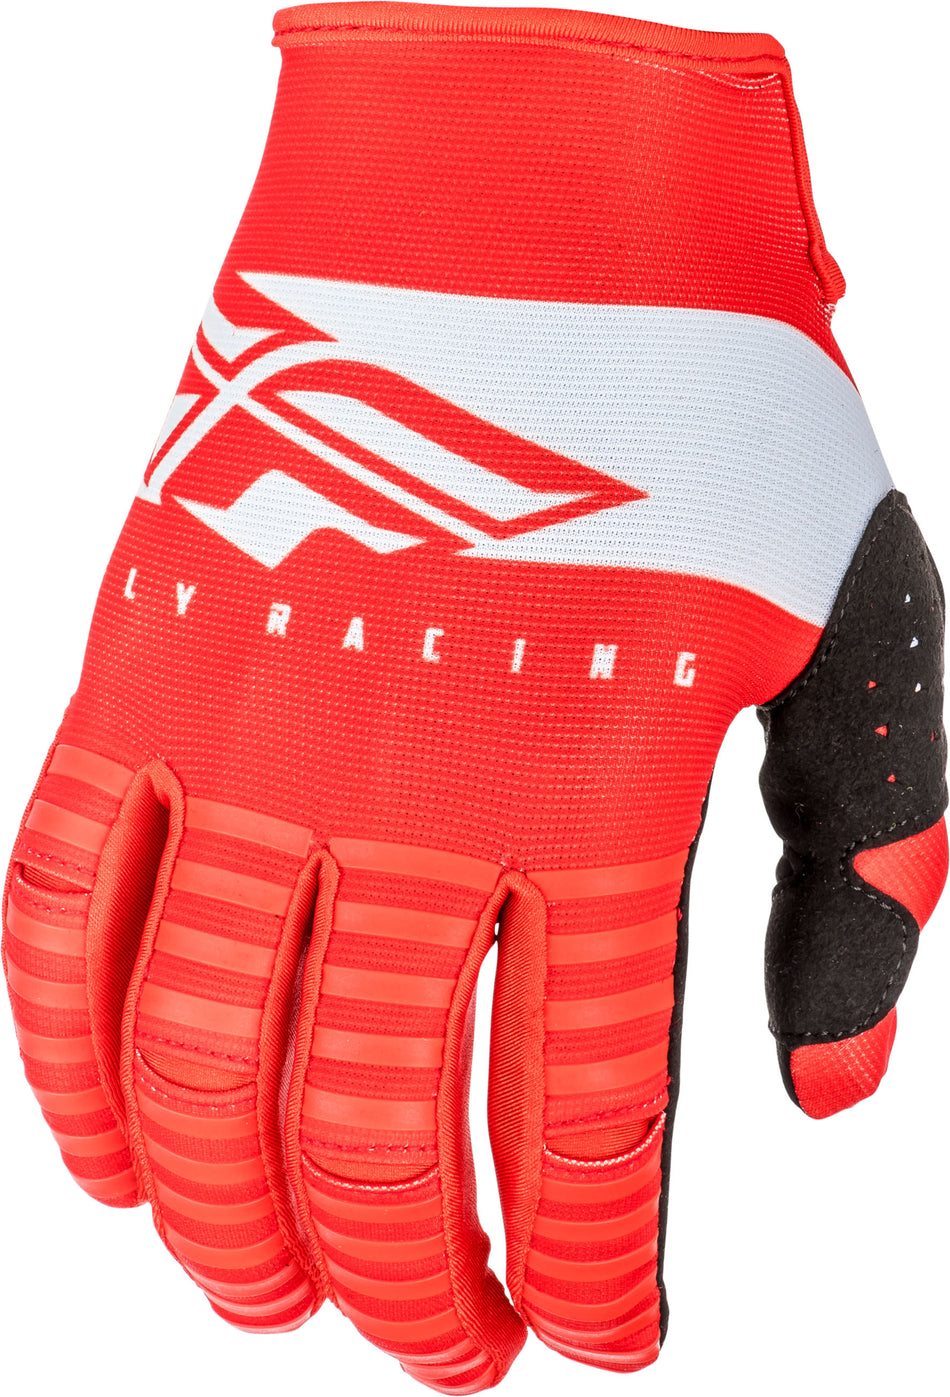 FLY RACING Kinetic Shield Gloves Red/White Sz 11 372-41211